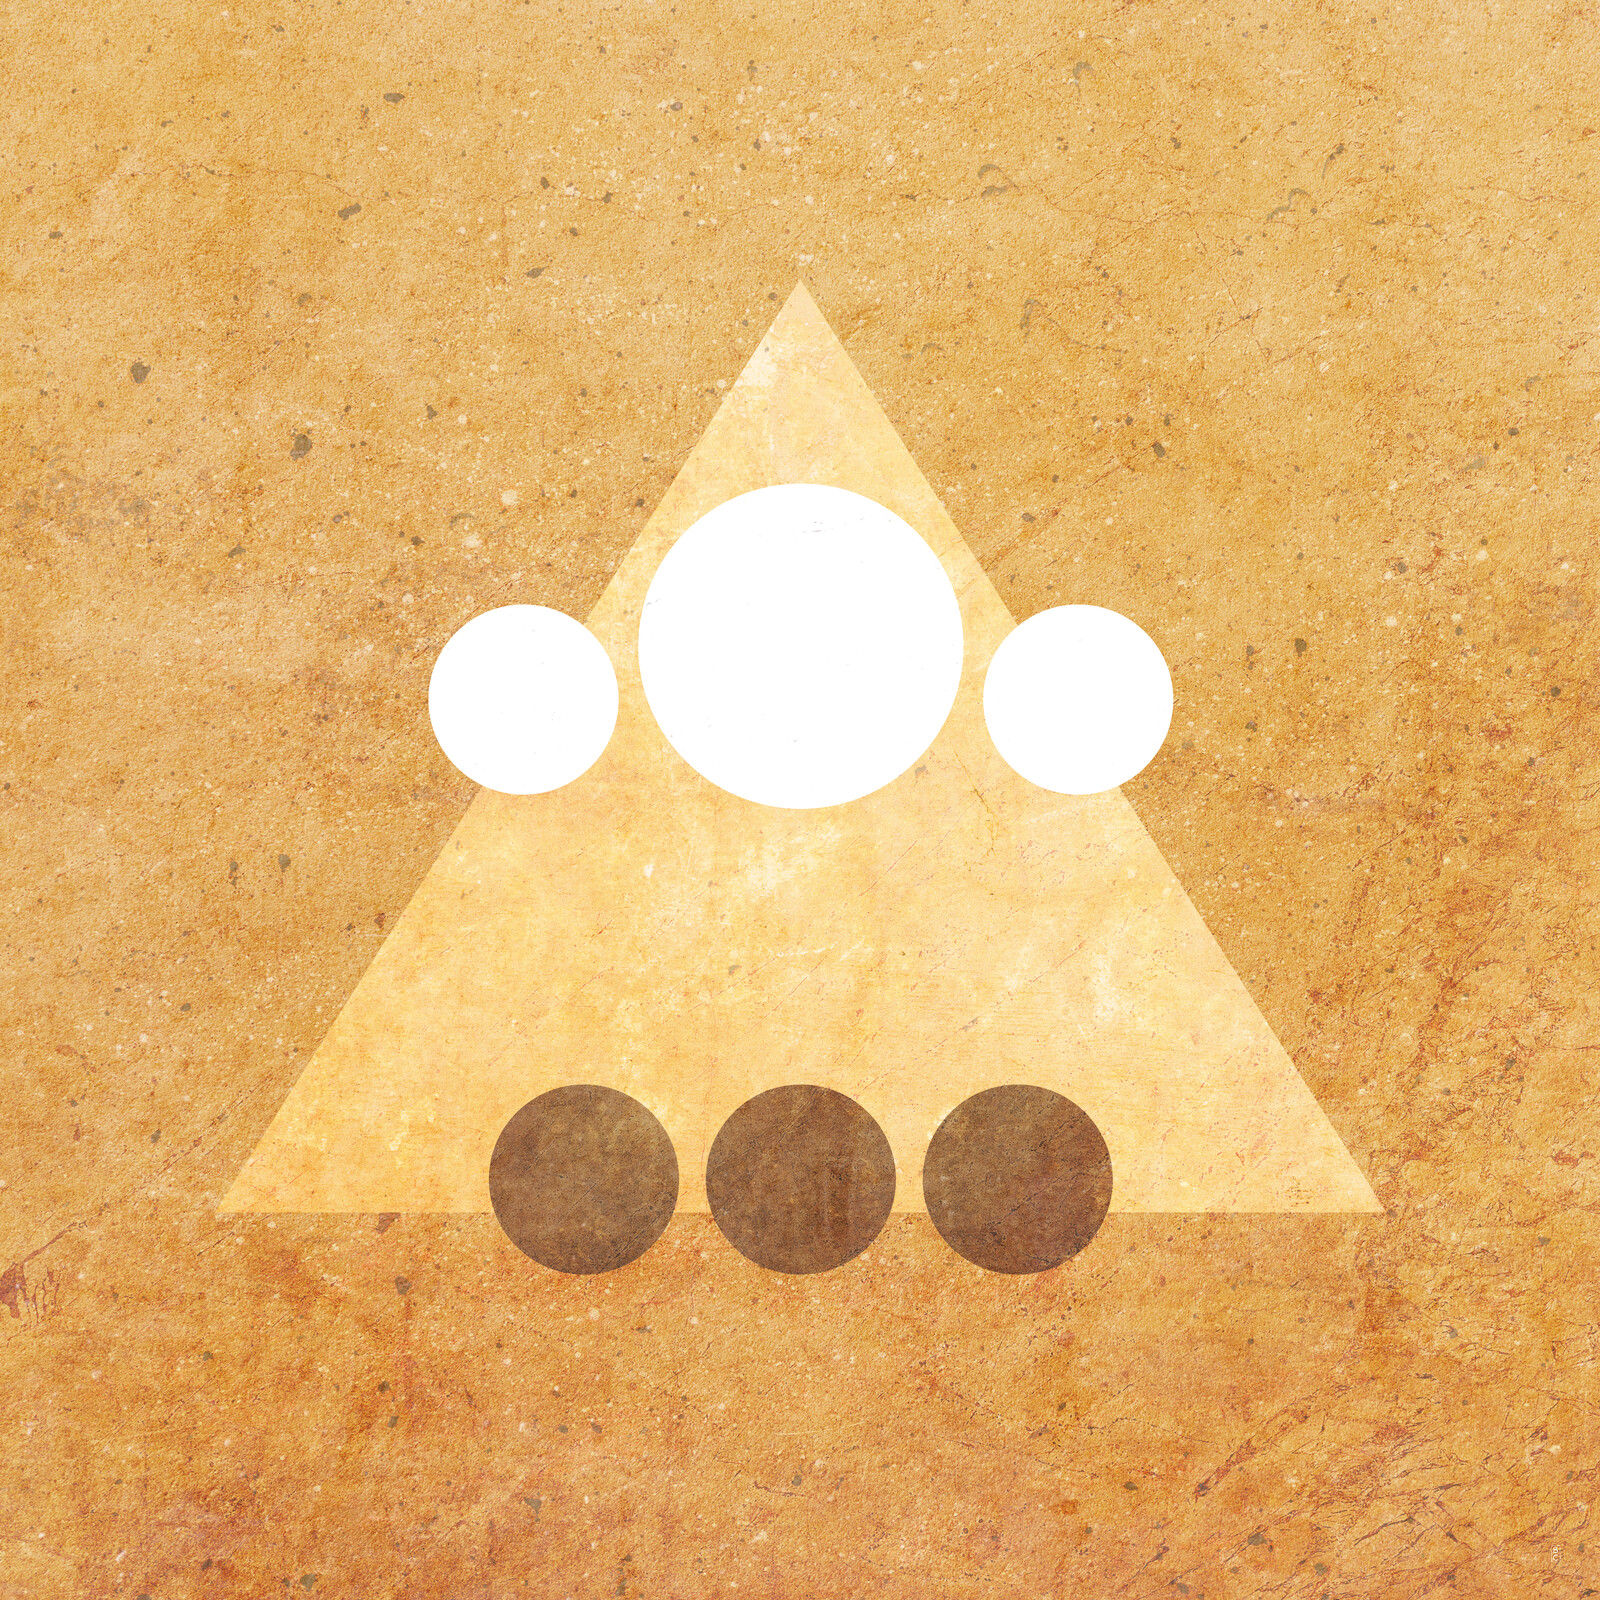 A light brown triangle with three white circles across the top (the middle circle is larger) and three dark brown circles across the bottom.